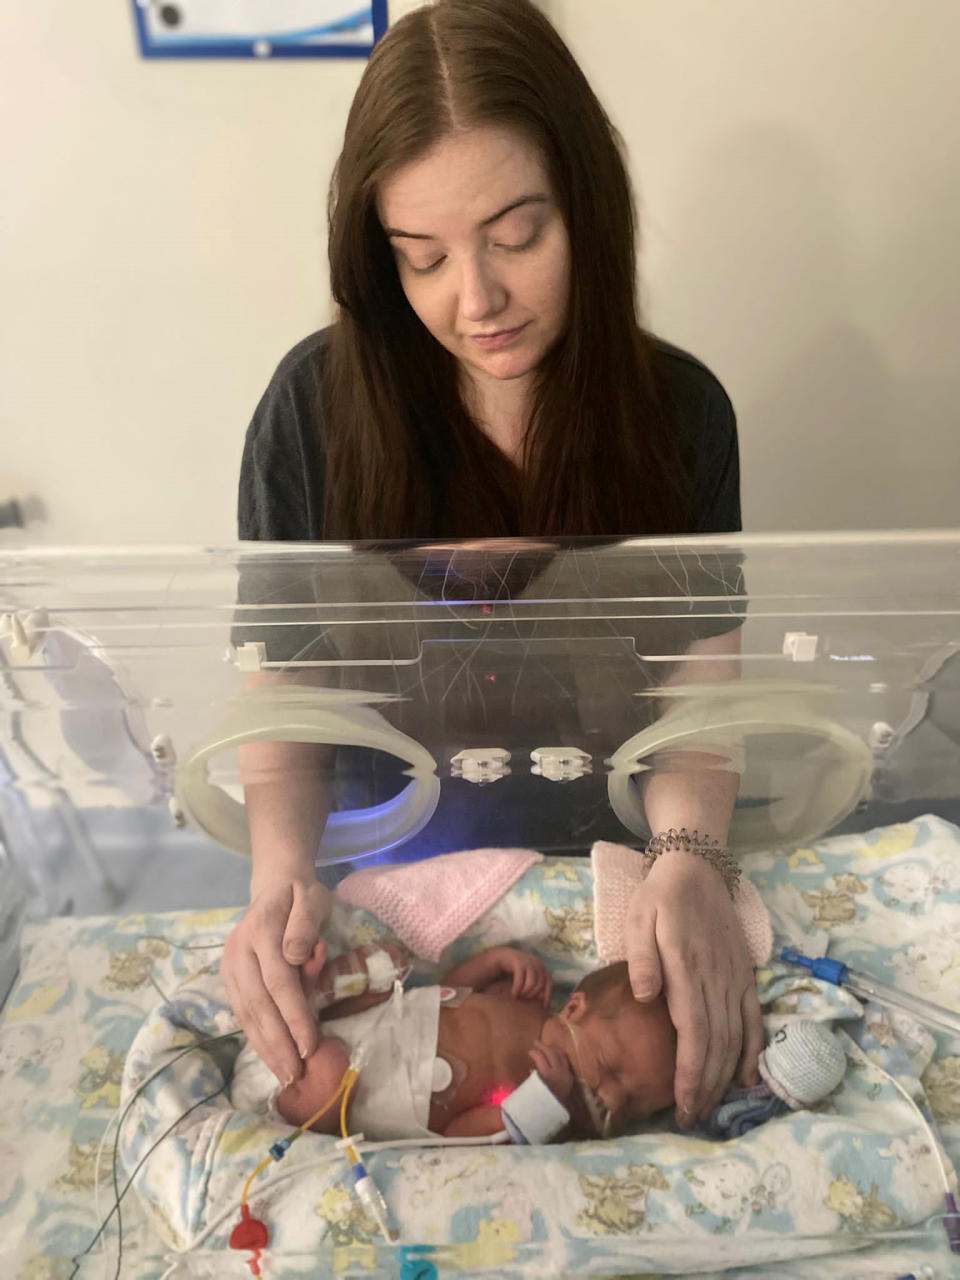 Premature baby Sienna had to be cared for in an incubator. (SWNS)